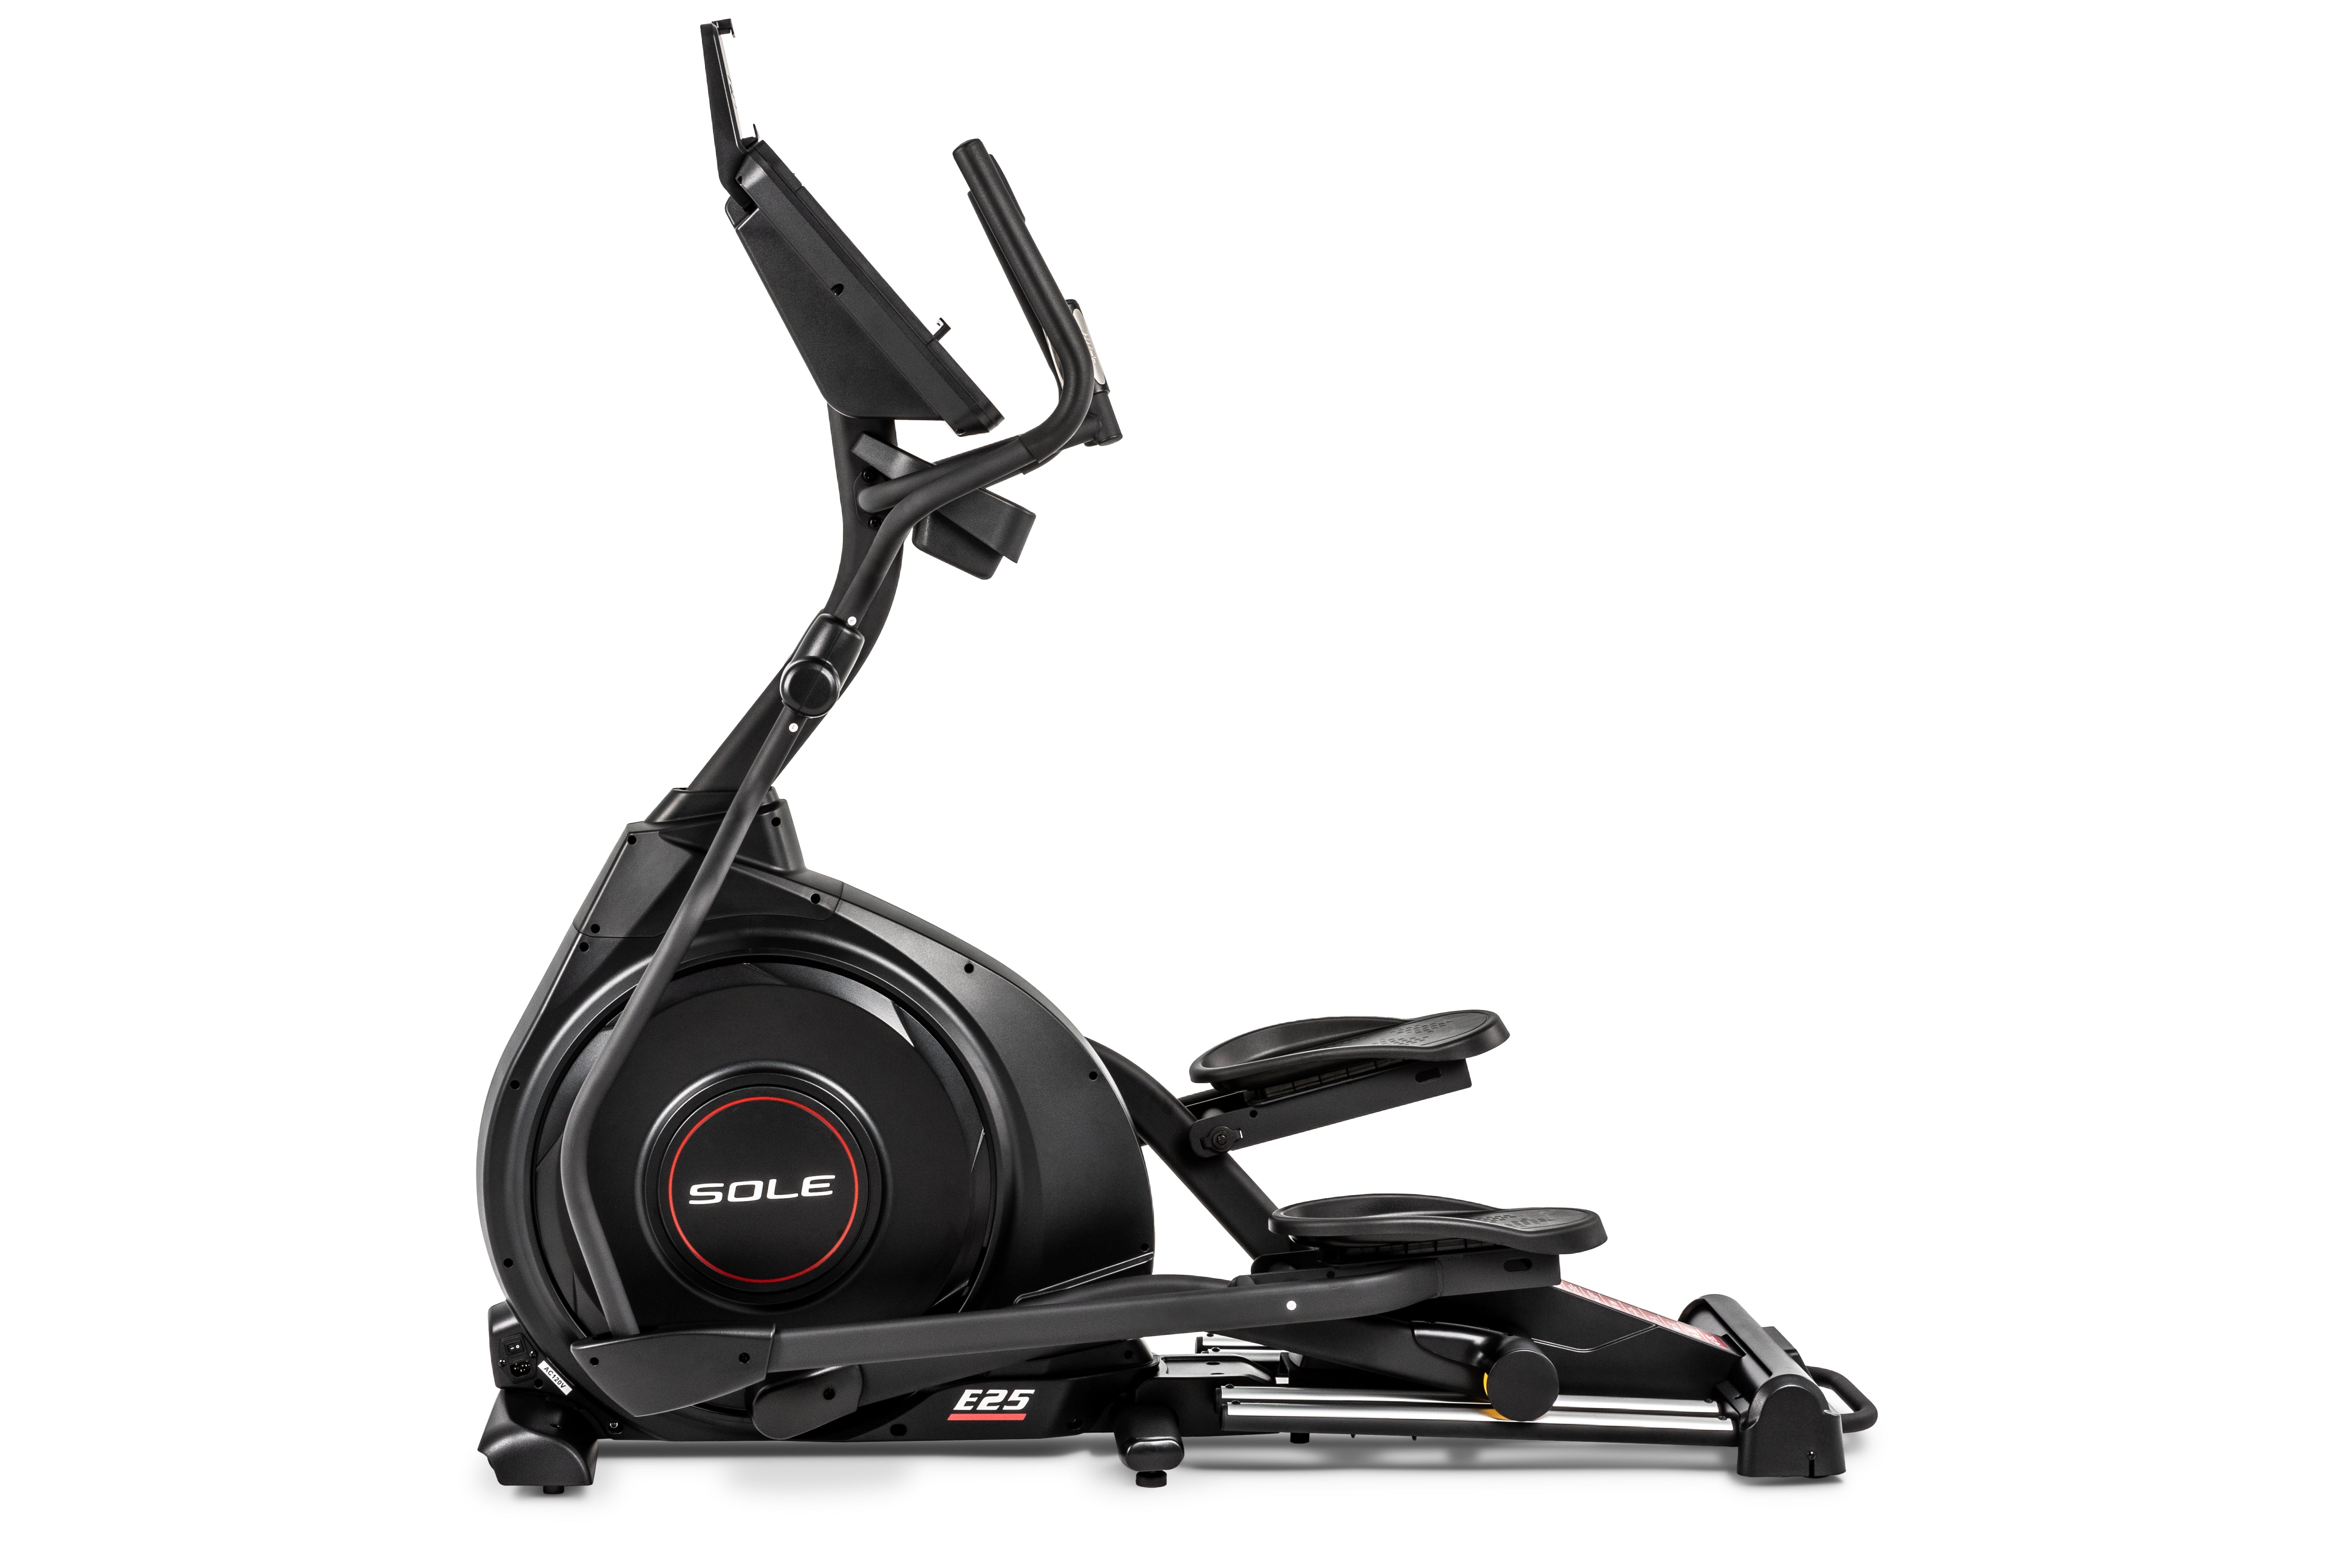 Sole E25 elliptical machine from a side angle, highlighting its adjustable screen, dual handlebars, pedal design, and prominent logo, set against a white background.